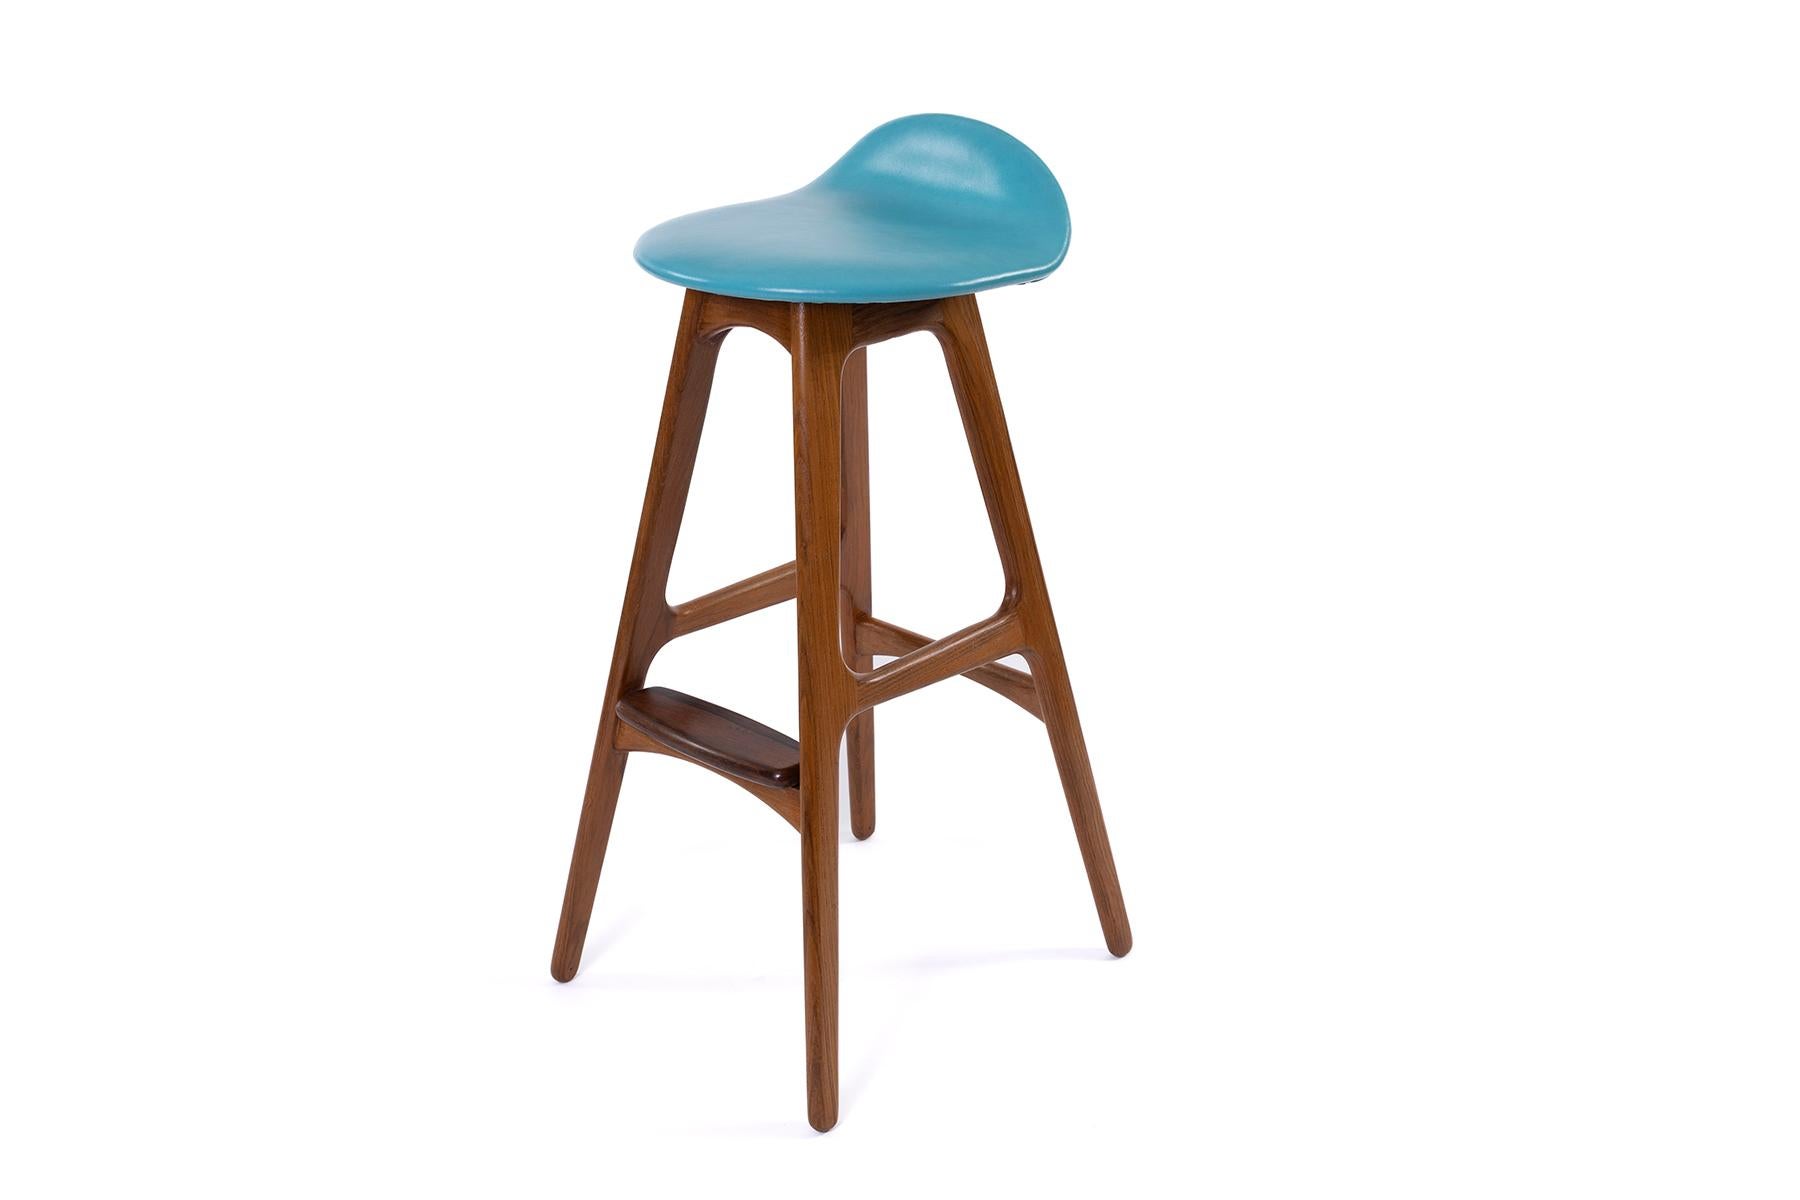 Pair of teak rosewood and leather barstools designed by Erik Buch. These sculptural examples have been newly finished and upholstered in a supple turquoise leather. Price listed is for the pair.